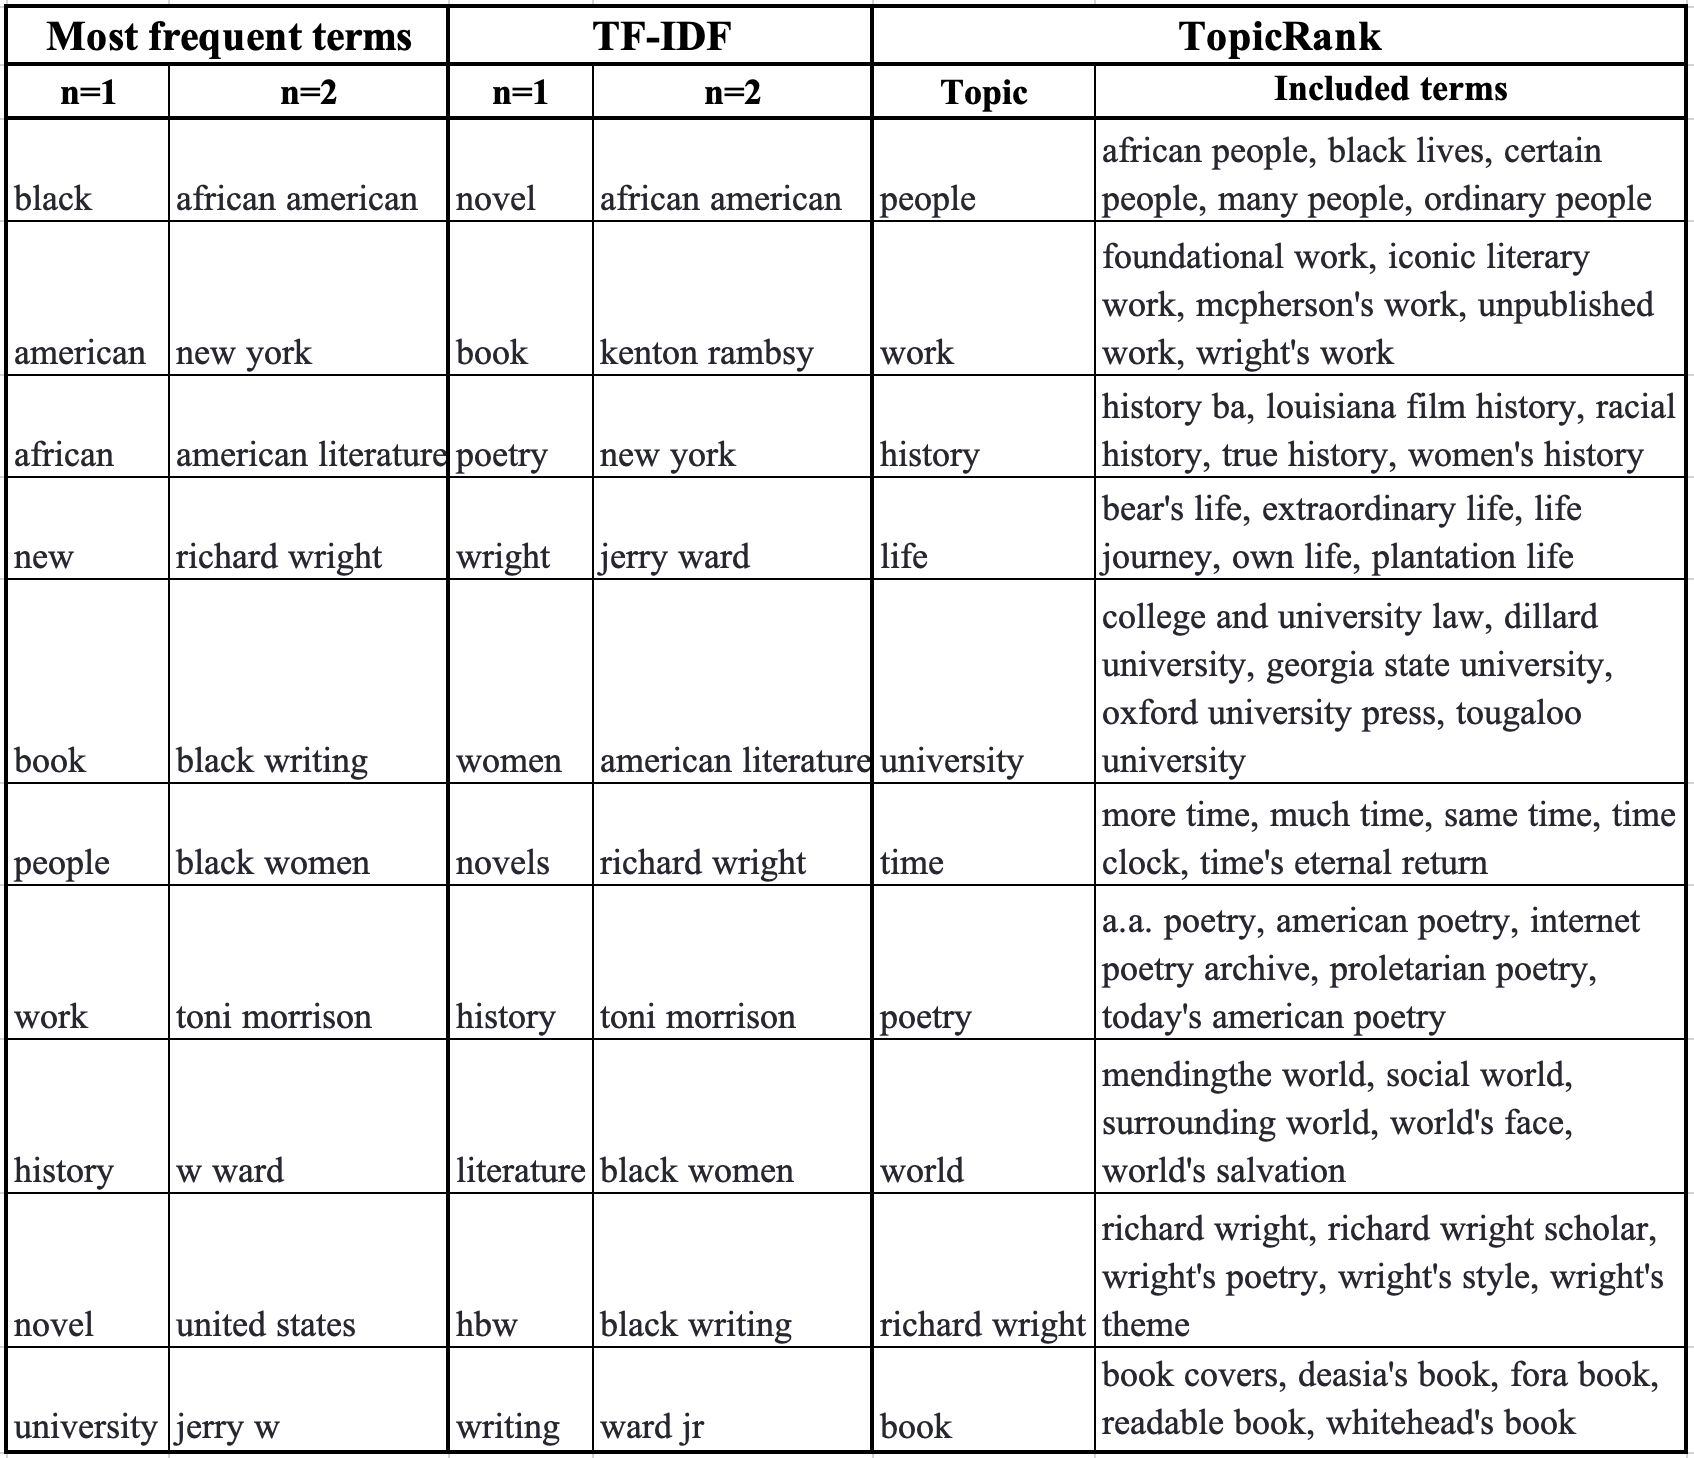 Table 2. Sample results from automated keyword extraction for Dataset 2, including Most frequent terms (n=1 and 2), TF-IDF terms (n=1 and 2), and TopicRank topics and a sample of terms related to each topic.